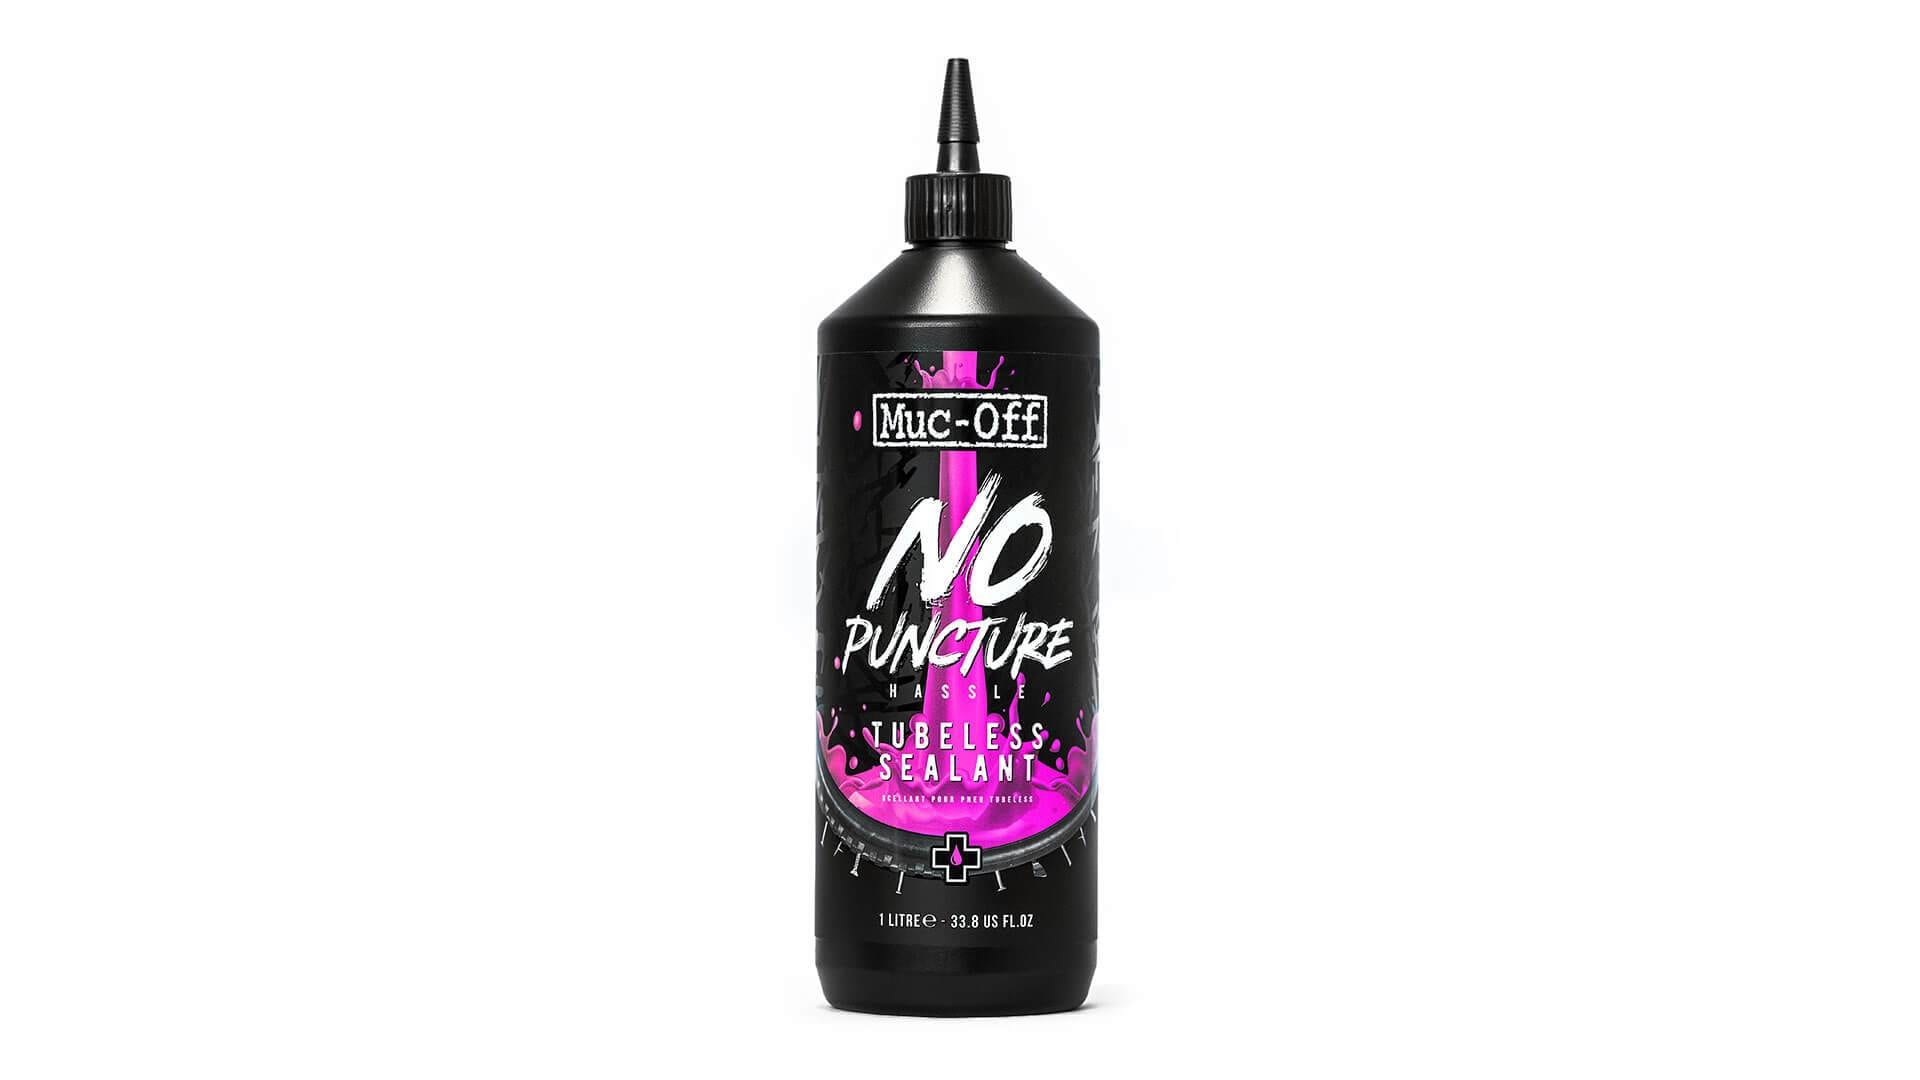 Muc-Off Tätningsmedel, No Puncture Hassle Tubeless Sealant